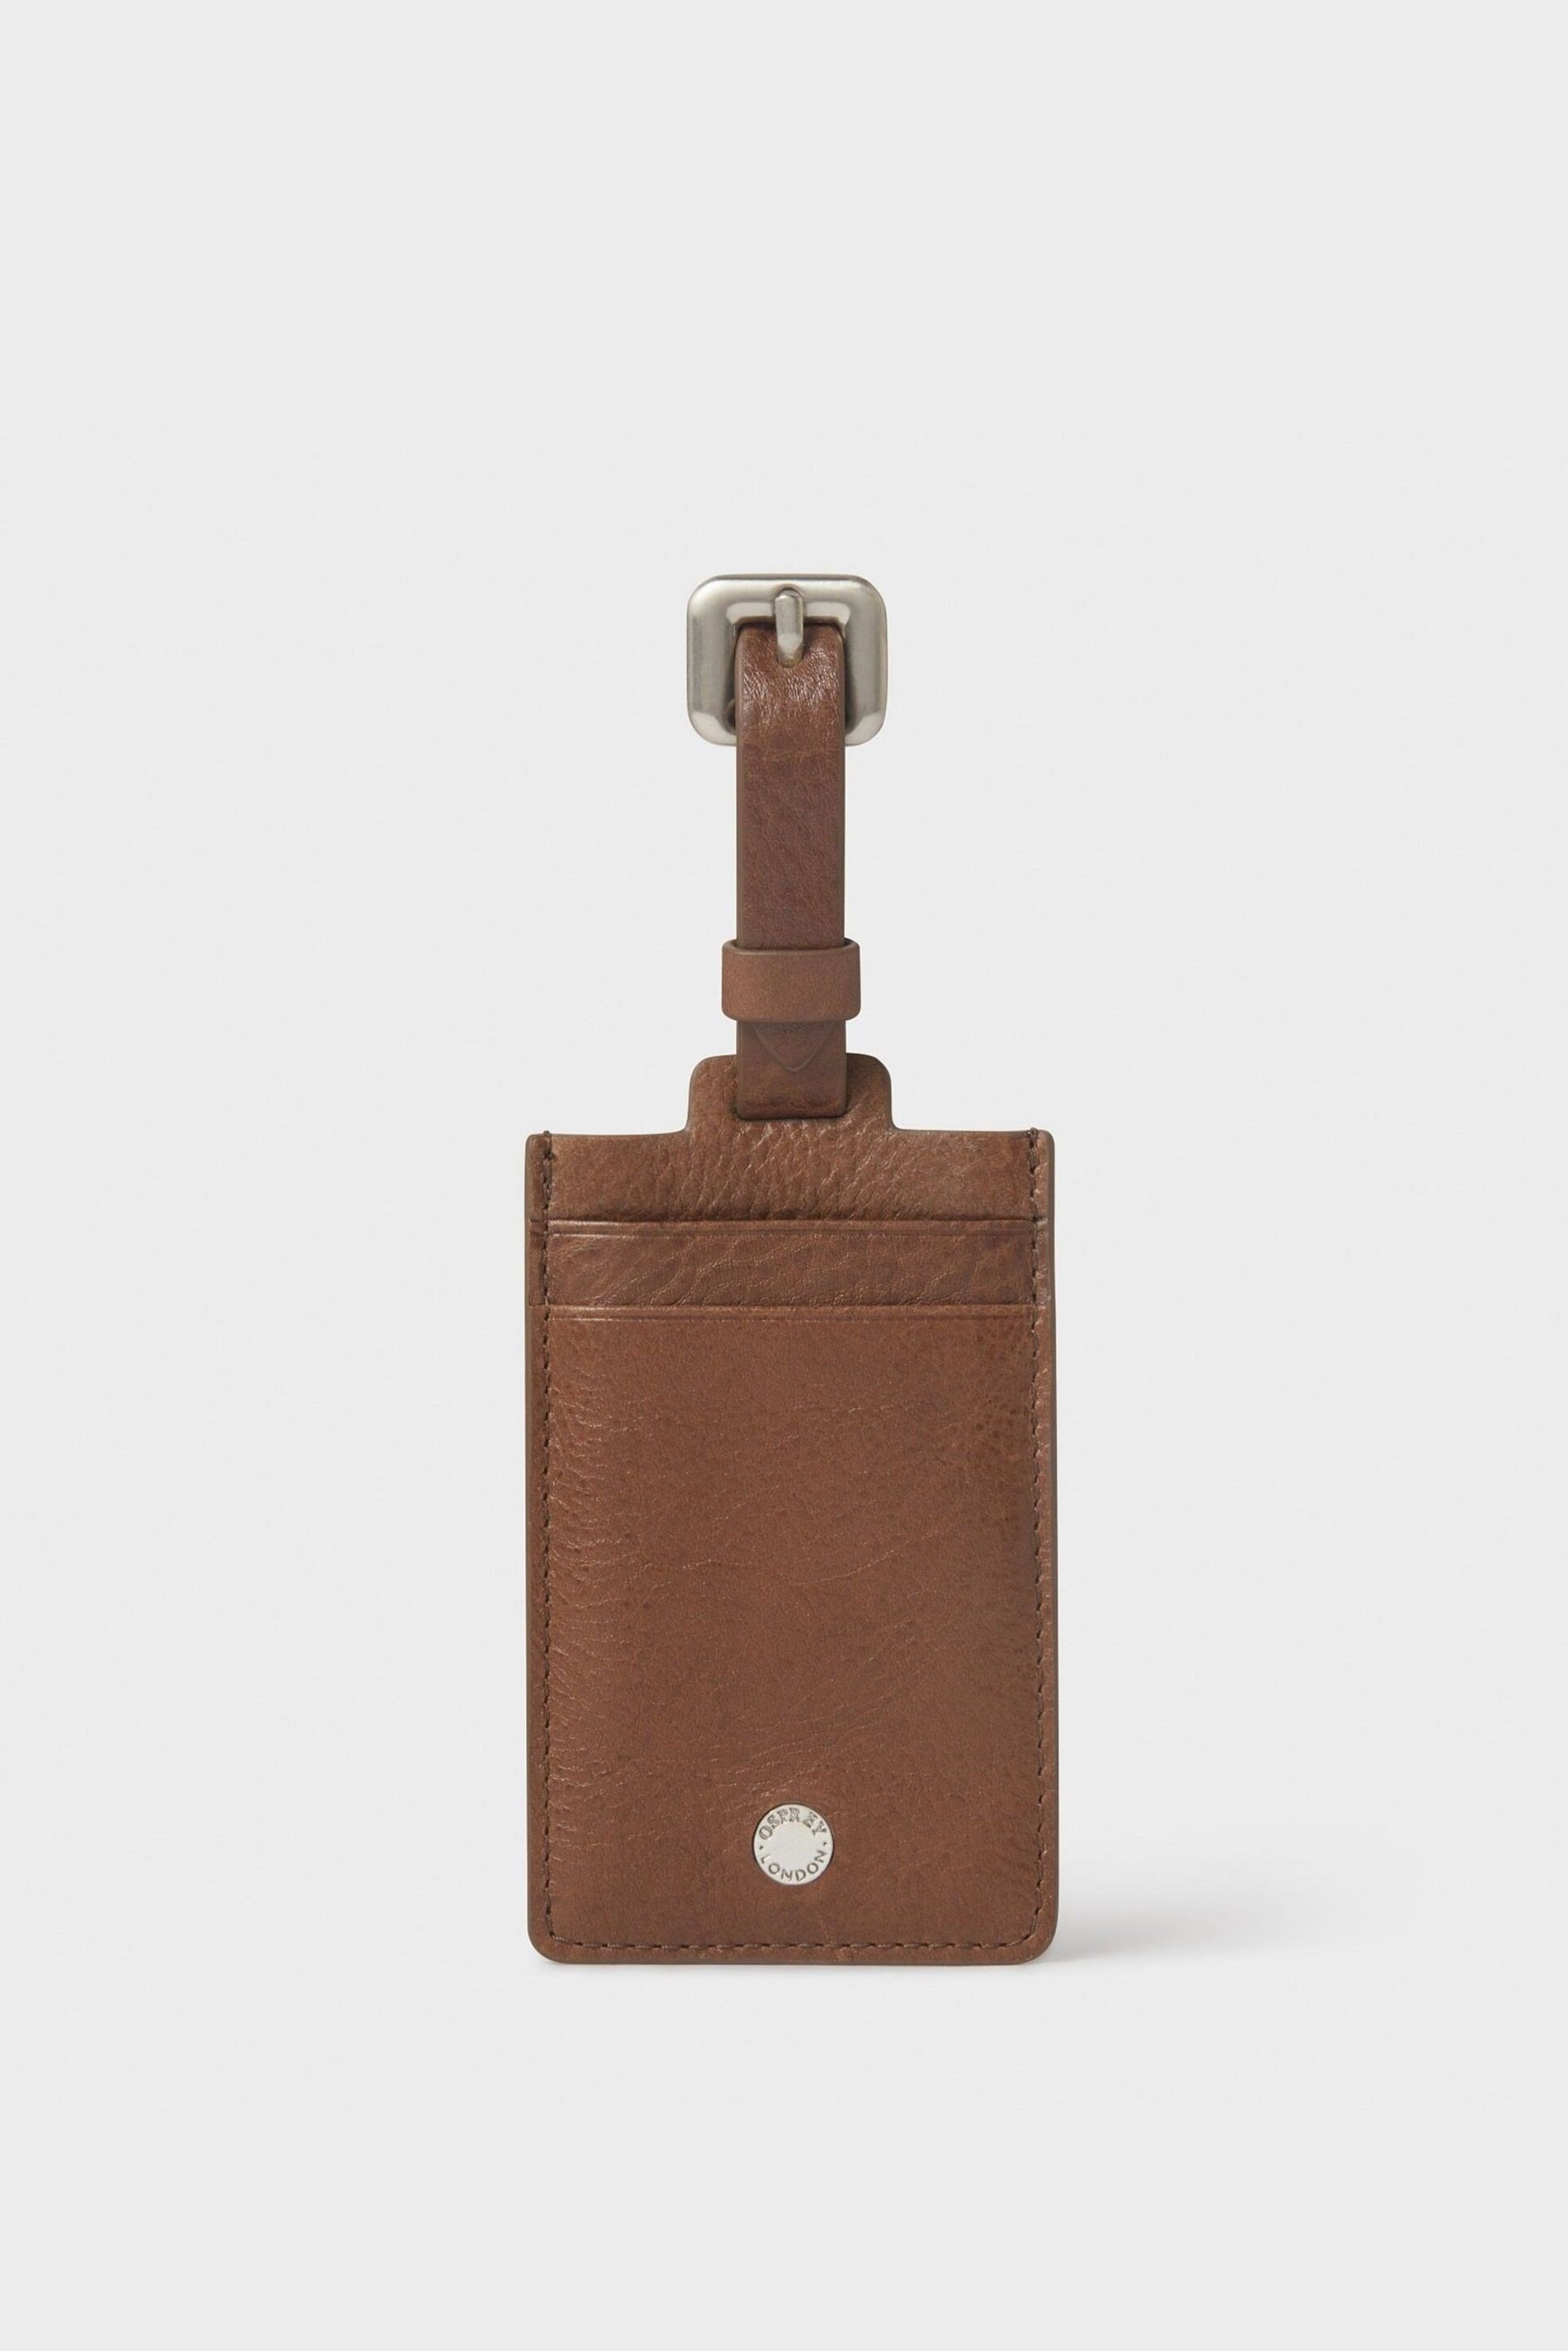 OSPREY LONDON Business Class Leather Luggage Tag - Image 2 of 5